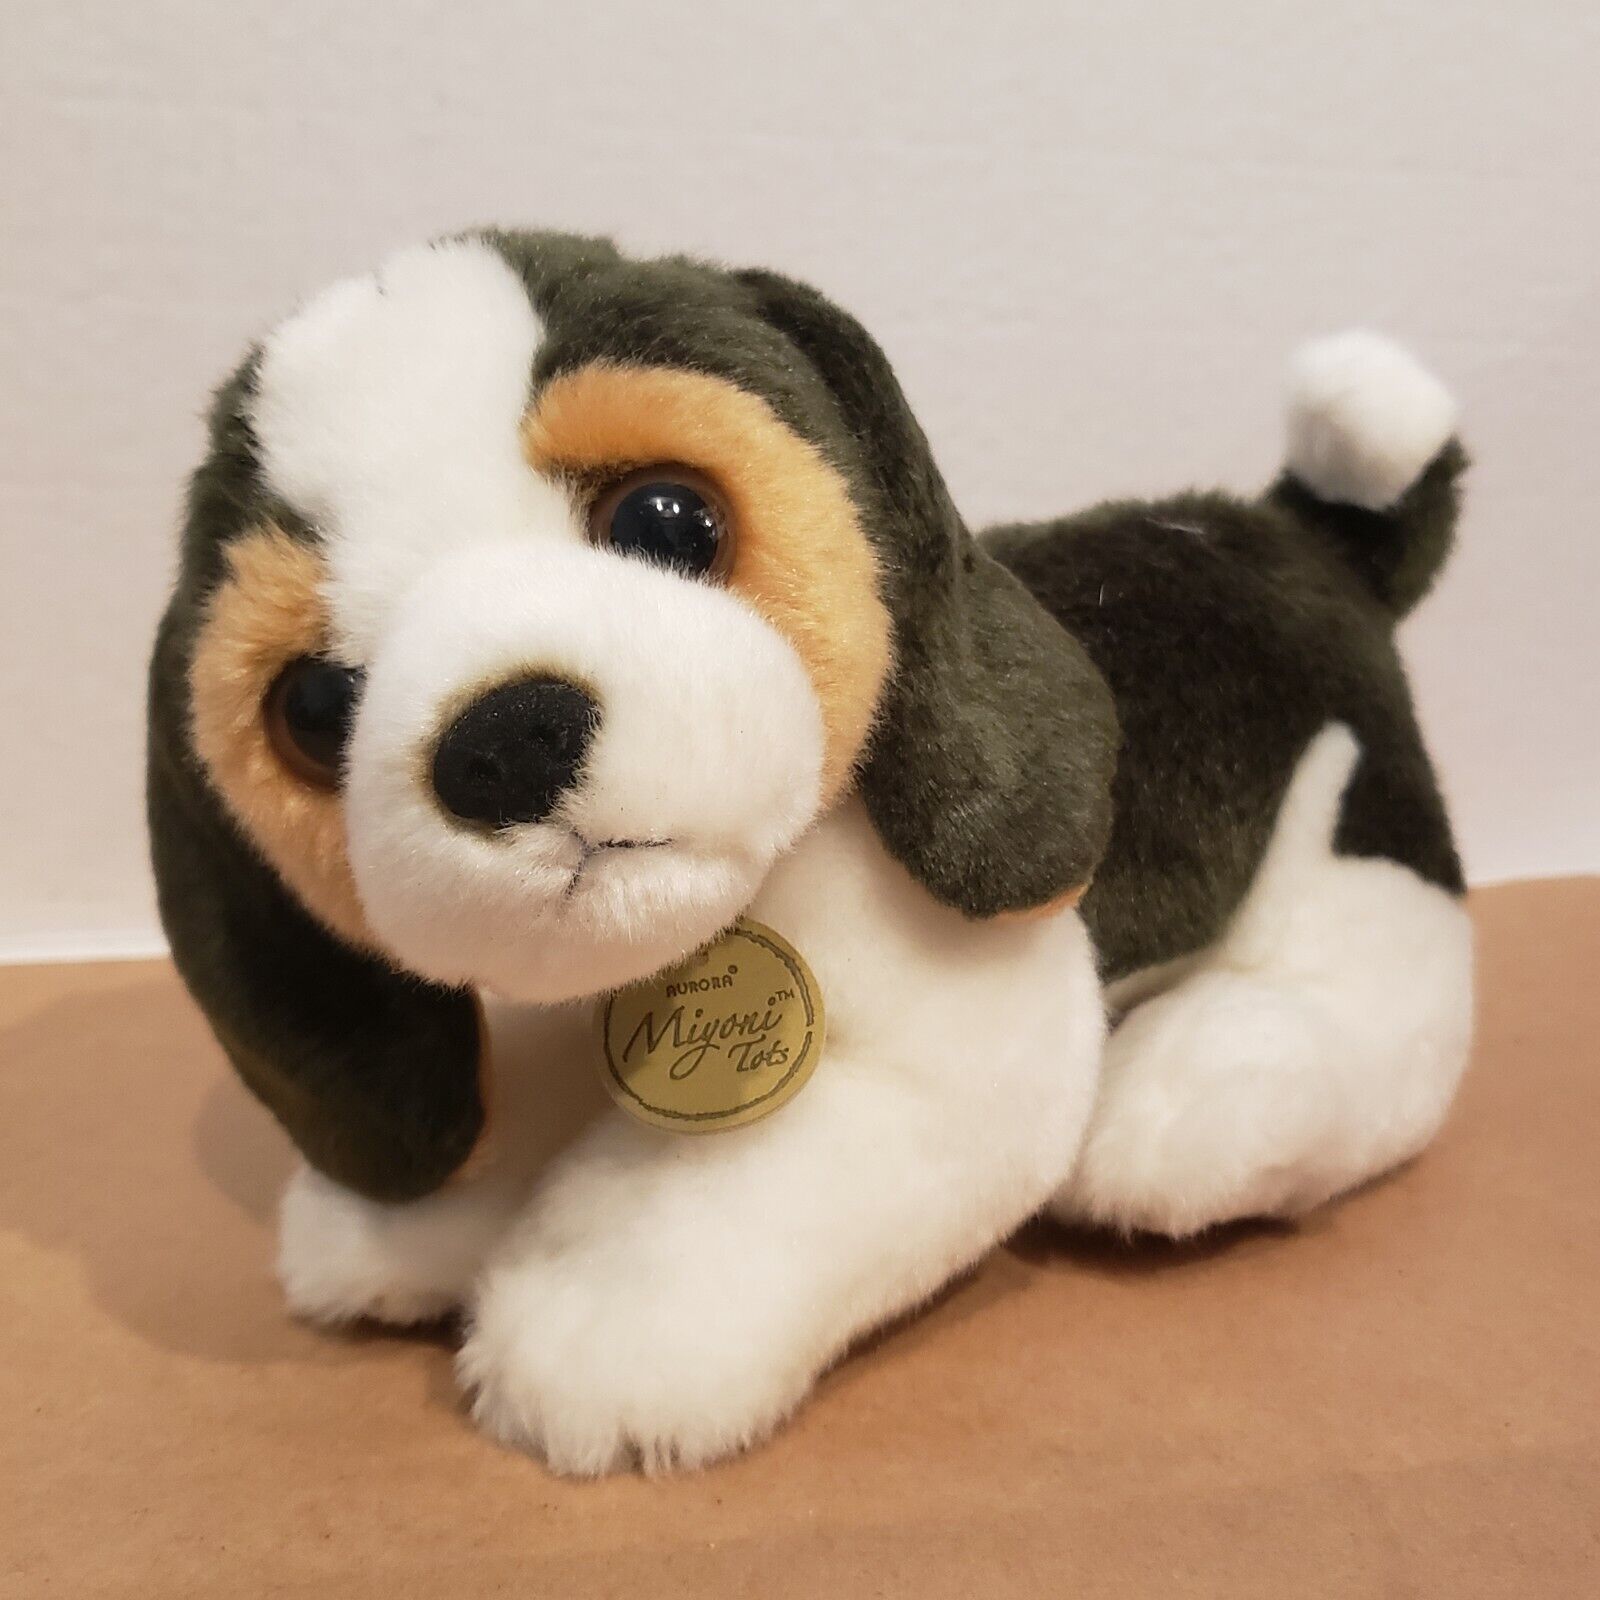 Miyoni NEW before selling Tots By Aurora Beagle Stuffed Puppy Product Tri-Colored Plush Dog